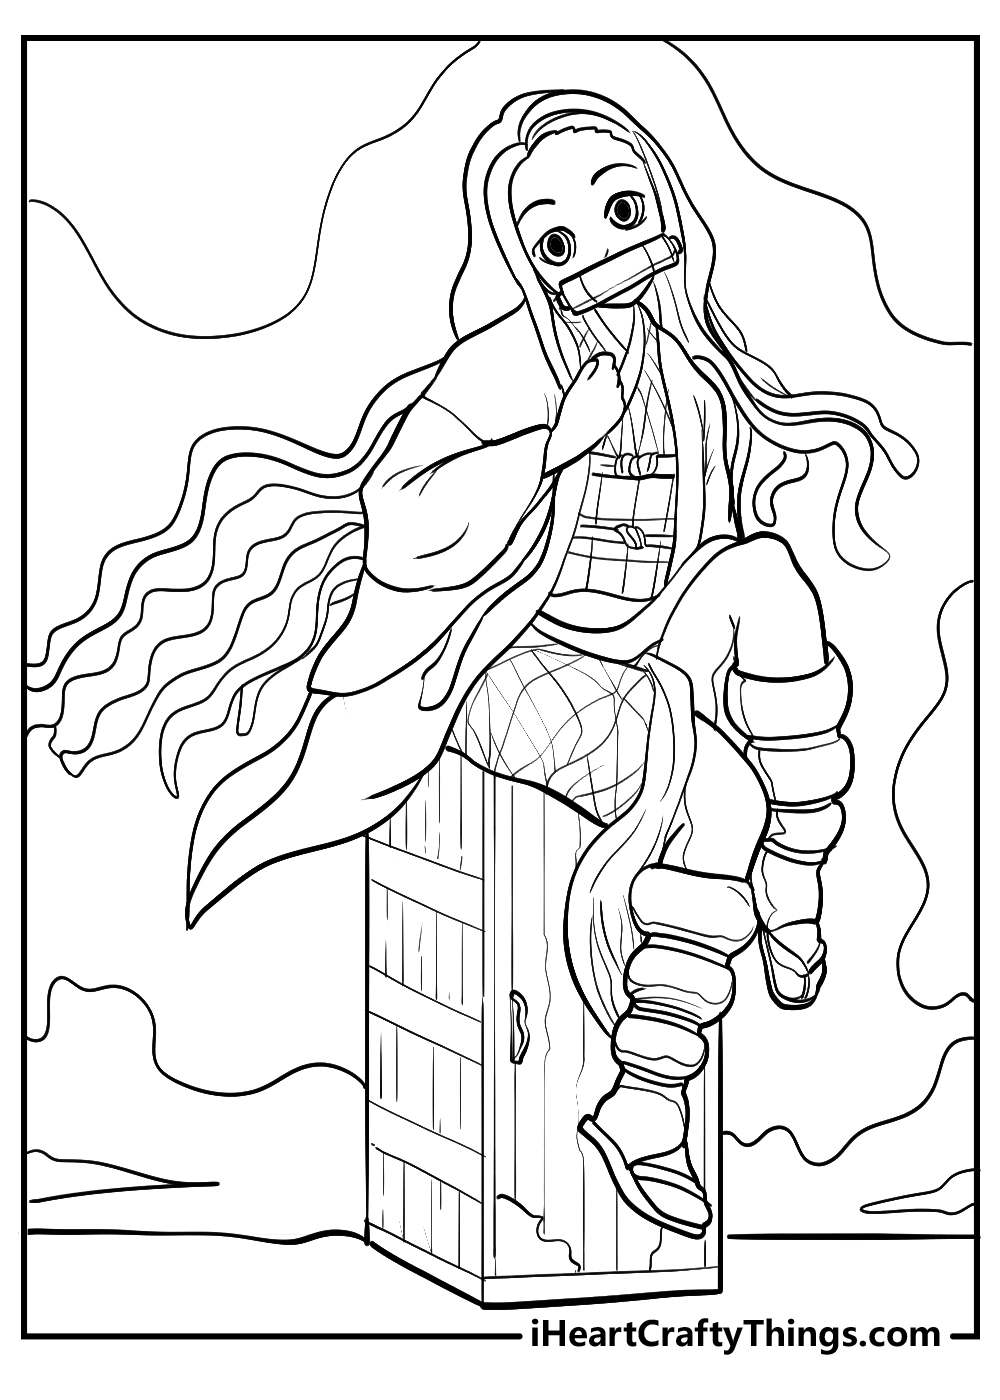 Nezuko Coloring Pages - Free Printable Coloring Pages for Kids